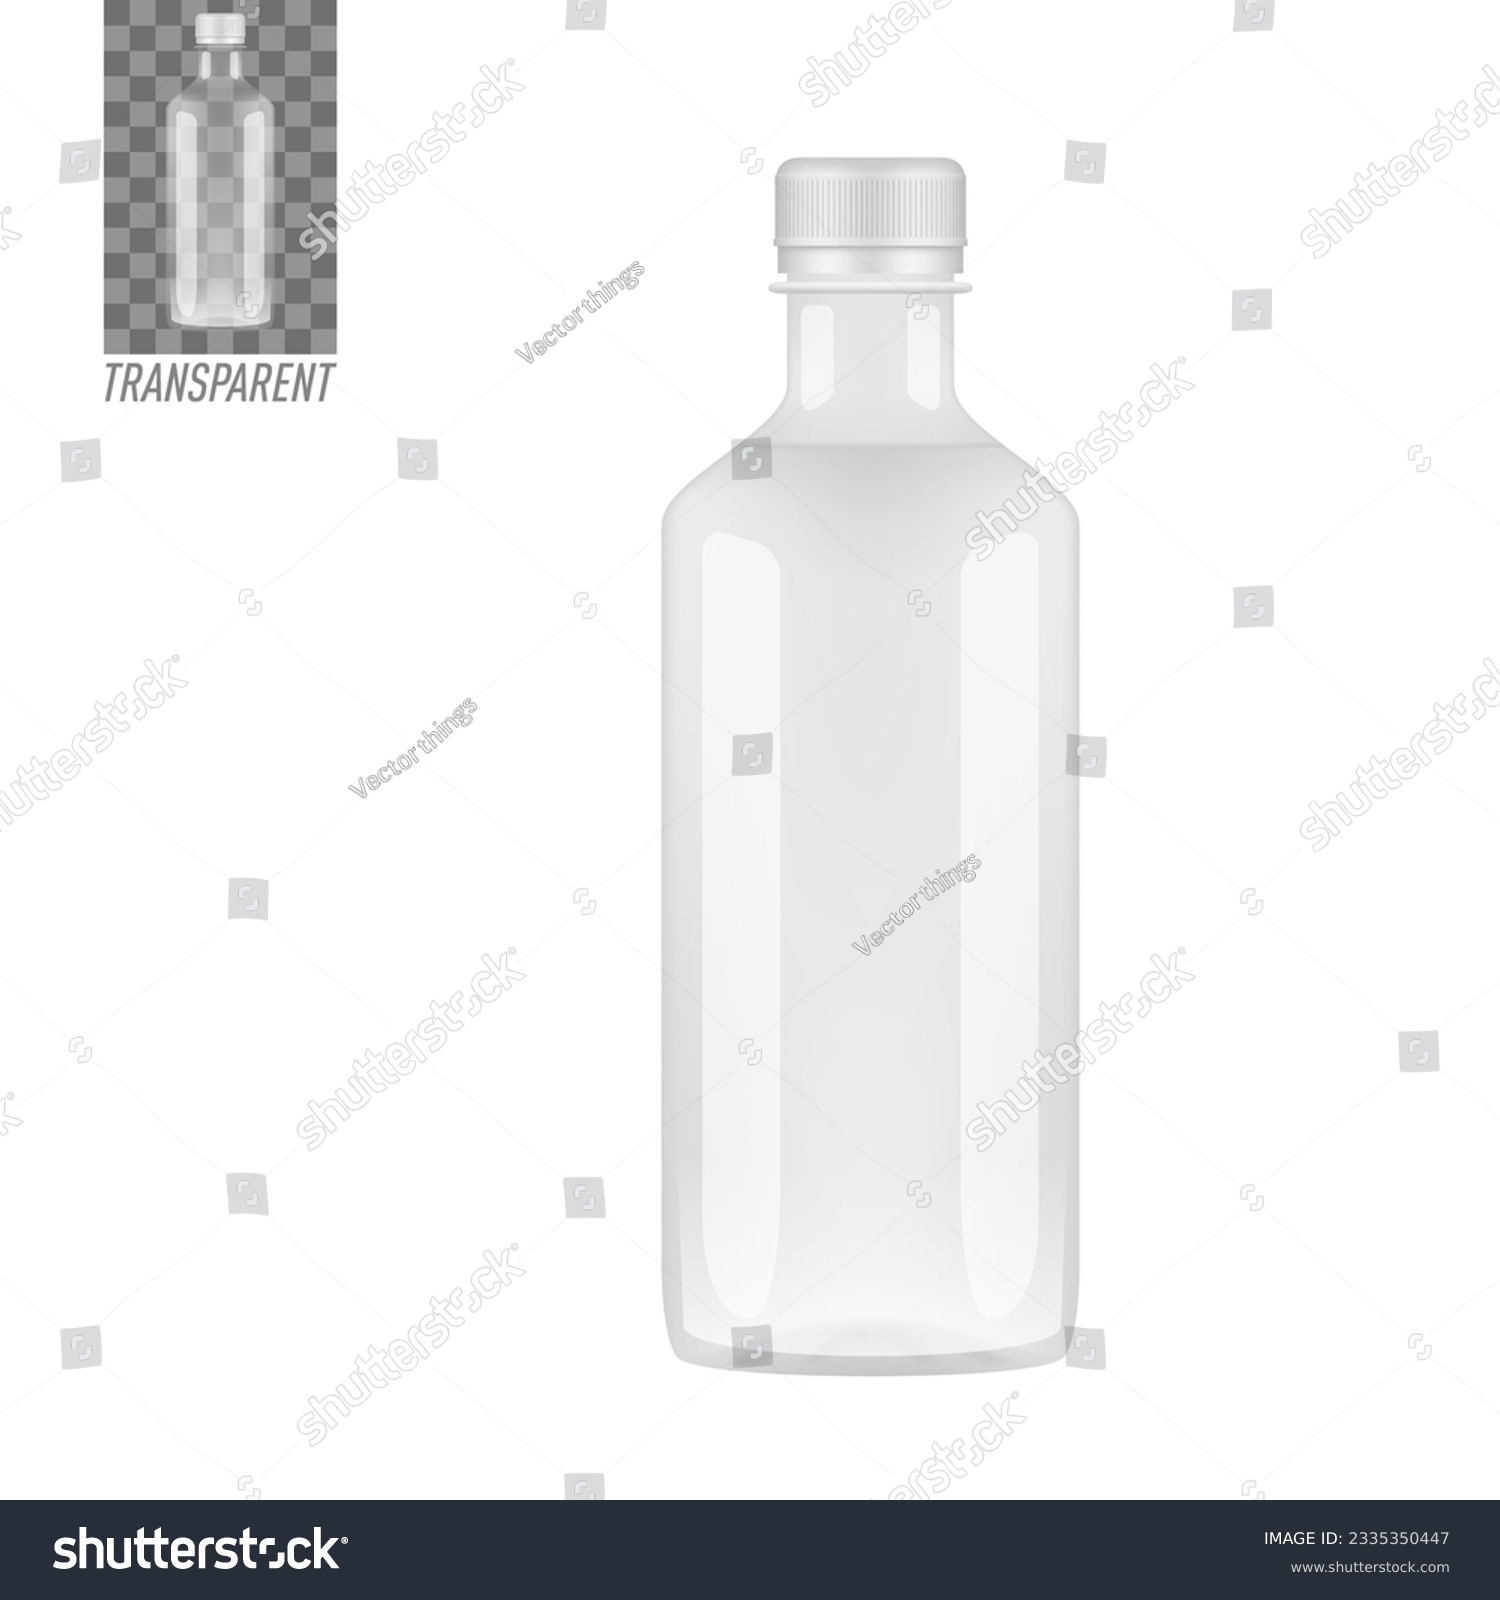 SVG of 3D Transparent Plastic Bottle With Glossy Highlights. EPS10 Vector svg